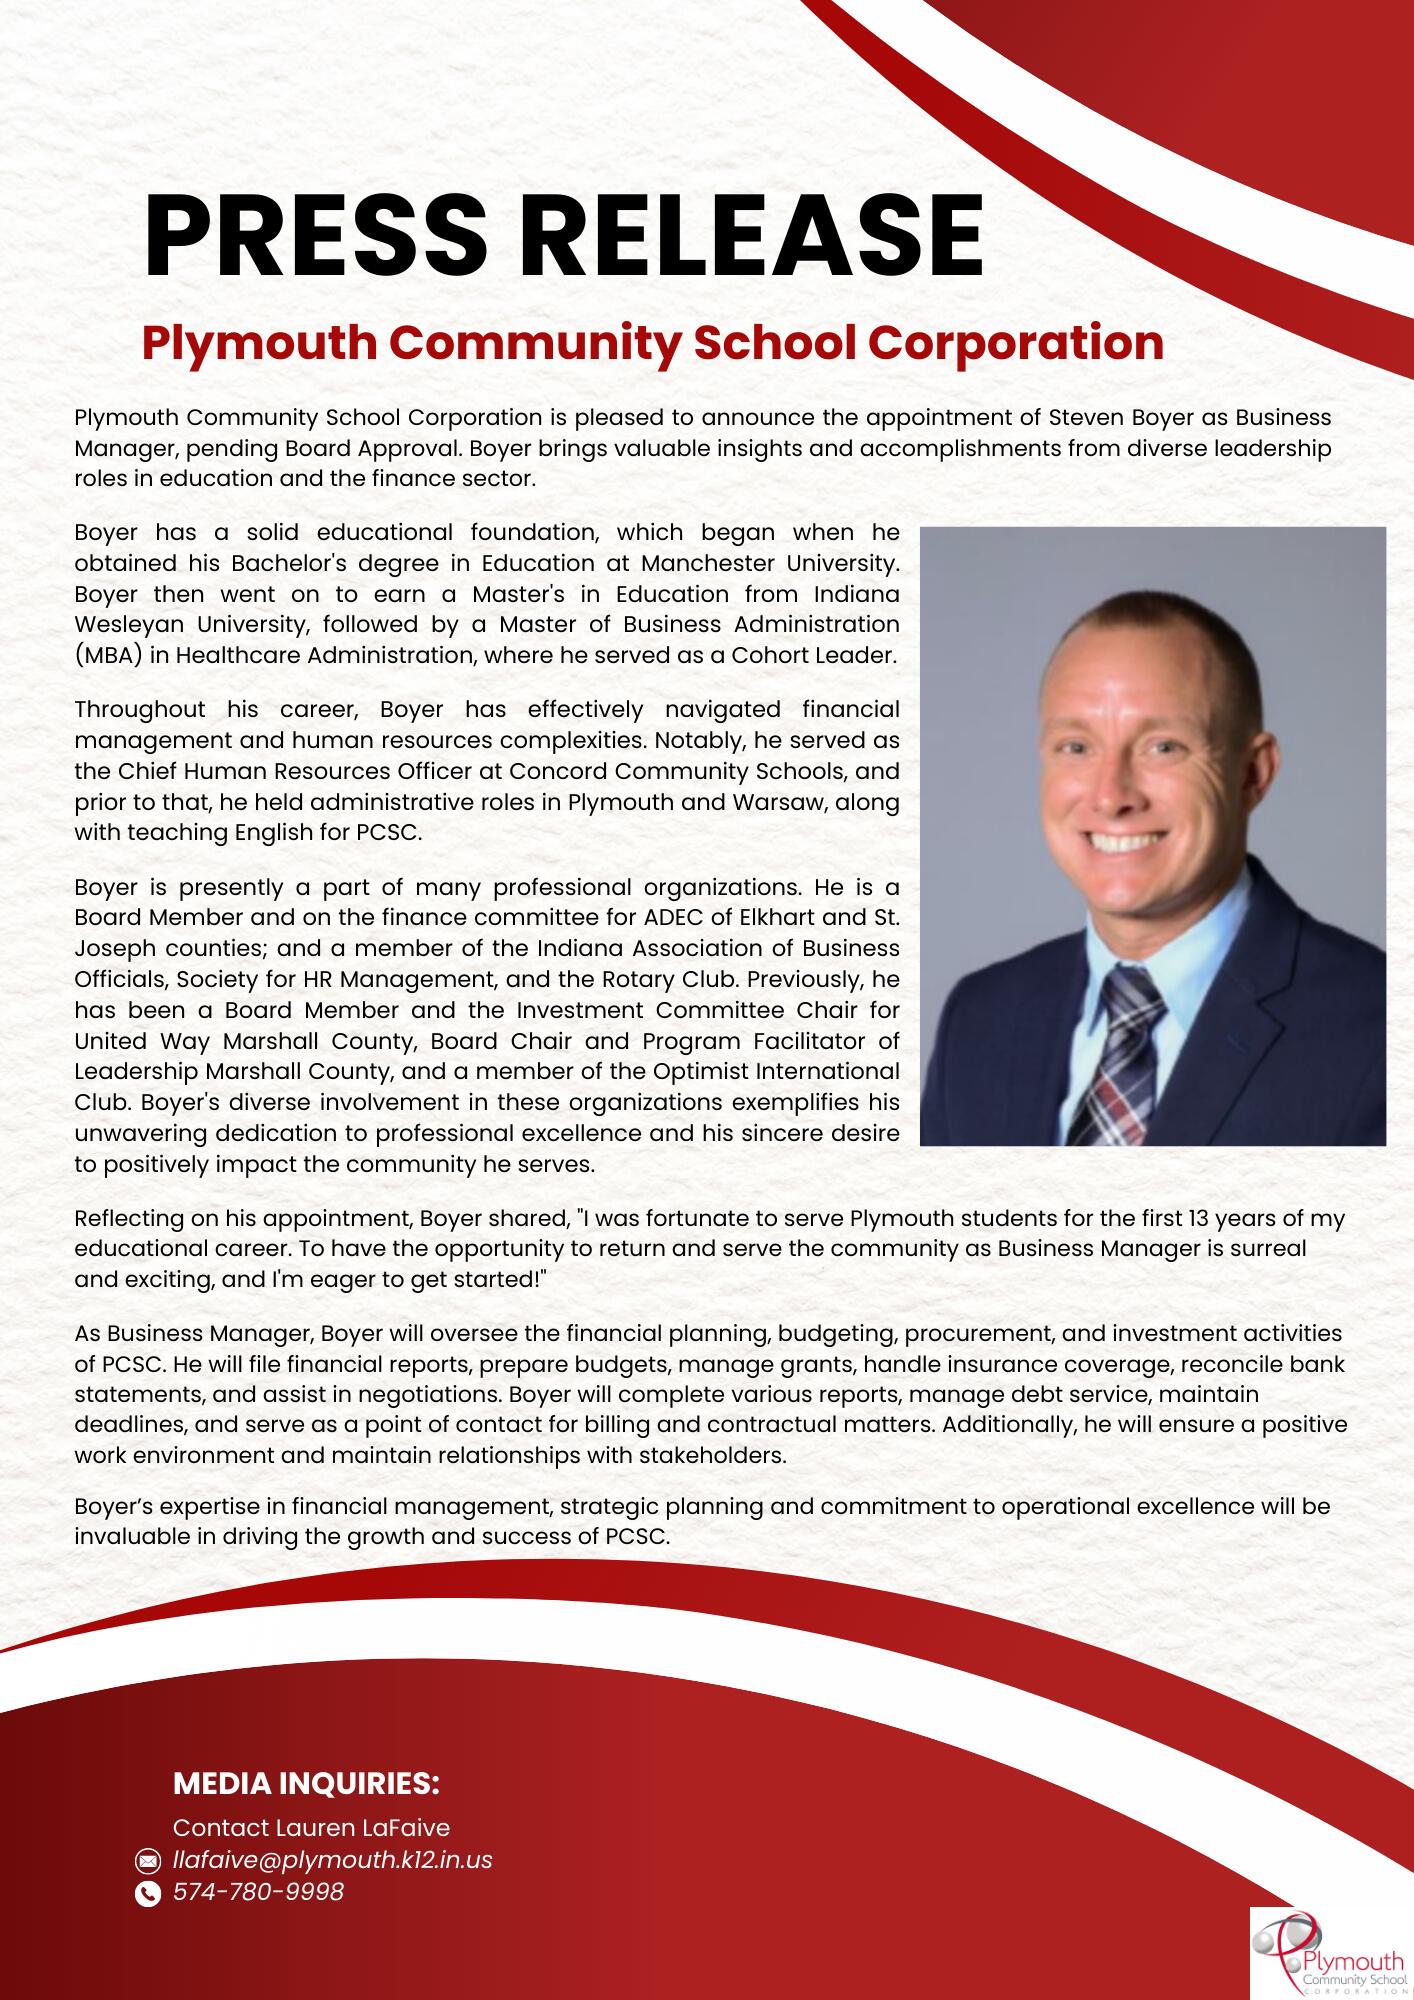 Plymouth Community School Corporation is pleased to announce the appointment of Steven Boyer as Business Manager, pending Board Approval. Boyer brings valuable insights and accomplishments from diverse leadership roles in education and the finance sector.  Boyer has a solid educational foundation, which began when he obtained his Bachelor's degree in Education at Manchester University. Boyer then went on to earn a Master's in Education from Indiana Wesleyan University, followed by a Master of Business Administration (MBA) in Healthcare Administration, where he served as a Cohort Leader.   Throughout his career, Boyer has effectively navigated financial management and human resources complexities. Notably, he served as the Chief Human Resources Officer at Concord Community Schools, and prior to that, he held administrative roles in Plymouth and Warsaw, along with teaching English for PCSC.  Boyer is presently a part of many professional organizations. He is a Board Member and on the finance committee for ADEC of Elkhart and St. Joseph counties; and a member of the Indiana Association of Business Officials, Society for HR Management, and the Rotary Club. Previously, he has been a Board Member and the Investment Committee Chair for United Way Marshall County, Board Chair and Program Facilitator of Leadership Marshall County, and a member of the Optimist International Club. Boyer's diverse involvement in these organizations exemplifies his unwavering dedication to professional excellence and his sincere desire to positively impact the community he serves.  Reflecting on his appointment, Boyer shared, "I was fortunate to serve Plymouth students for the first 13 years of my educational career. To have the opportunity to return and serve the community as Business Manager is surreal and exciting, and I'm eager to get started!"  As Business Manager, Boyer will oversee the financial planning, budgeting, procurement, and investment activities of PCSC. He will file financial reports, prepare budgets, manage grants, handle insurance coverage, reconcile bank statements, and assist in negotiations. Boyer will complete various reports, manage debt service, maintain deadlines, and serve as a point of contact for billing and contractual matters. Additionally, he will ensure a positive work environment and maintain relationships with stakeholders.   Boyer’s expertise in financial management, strategic planning and commitment to operational excellence will be invaluable in driving the growth and success of PCSC.